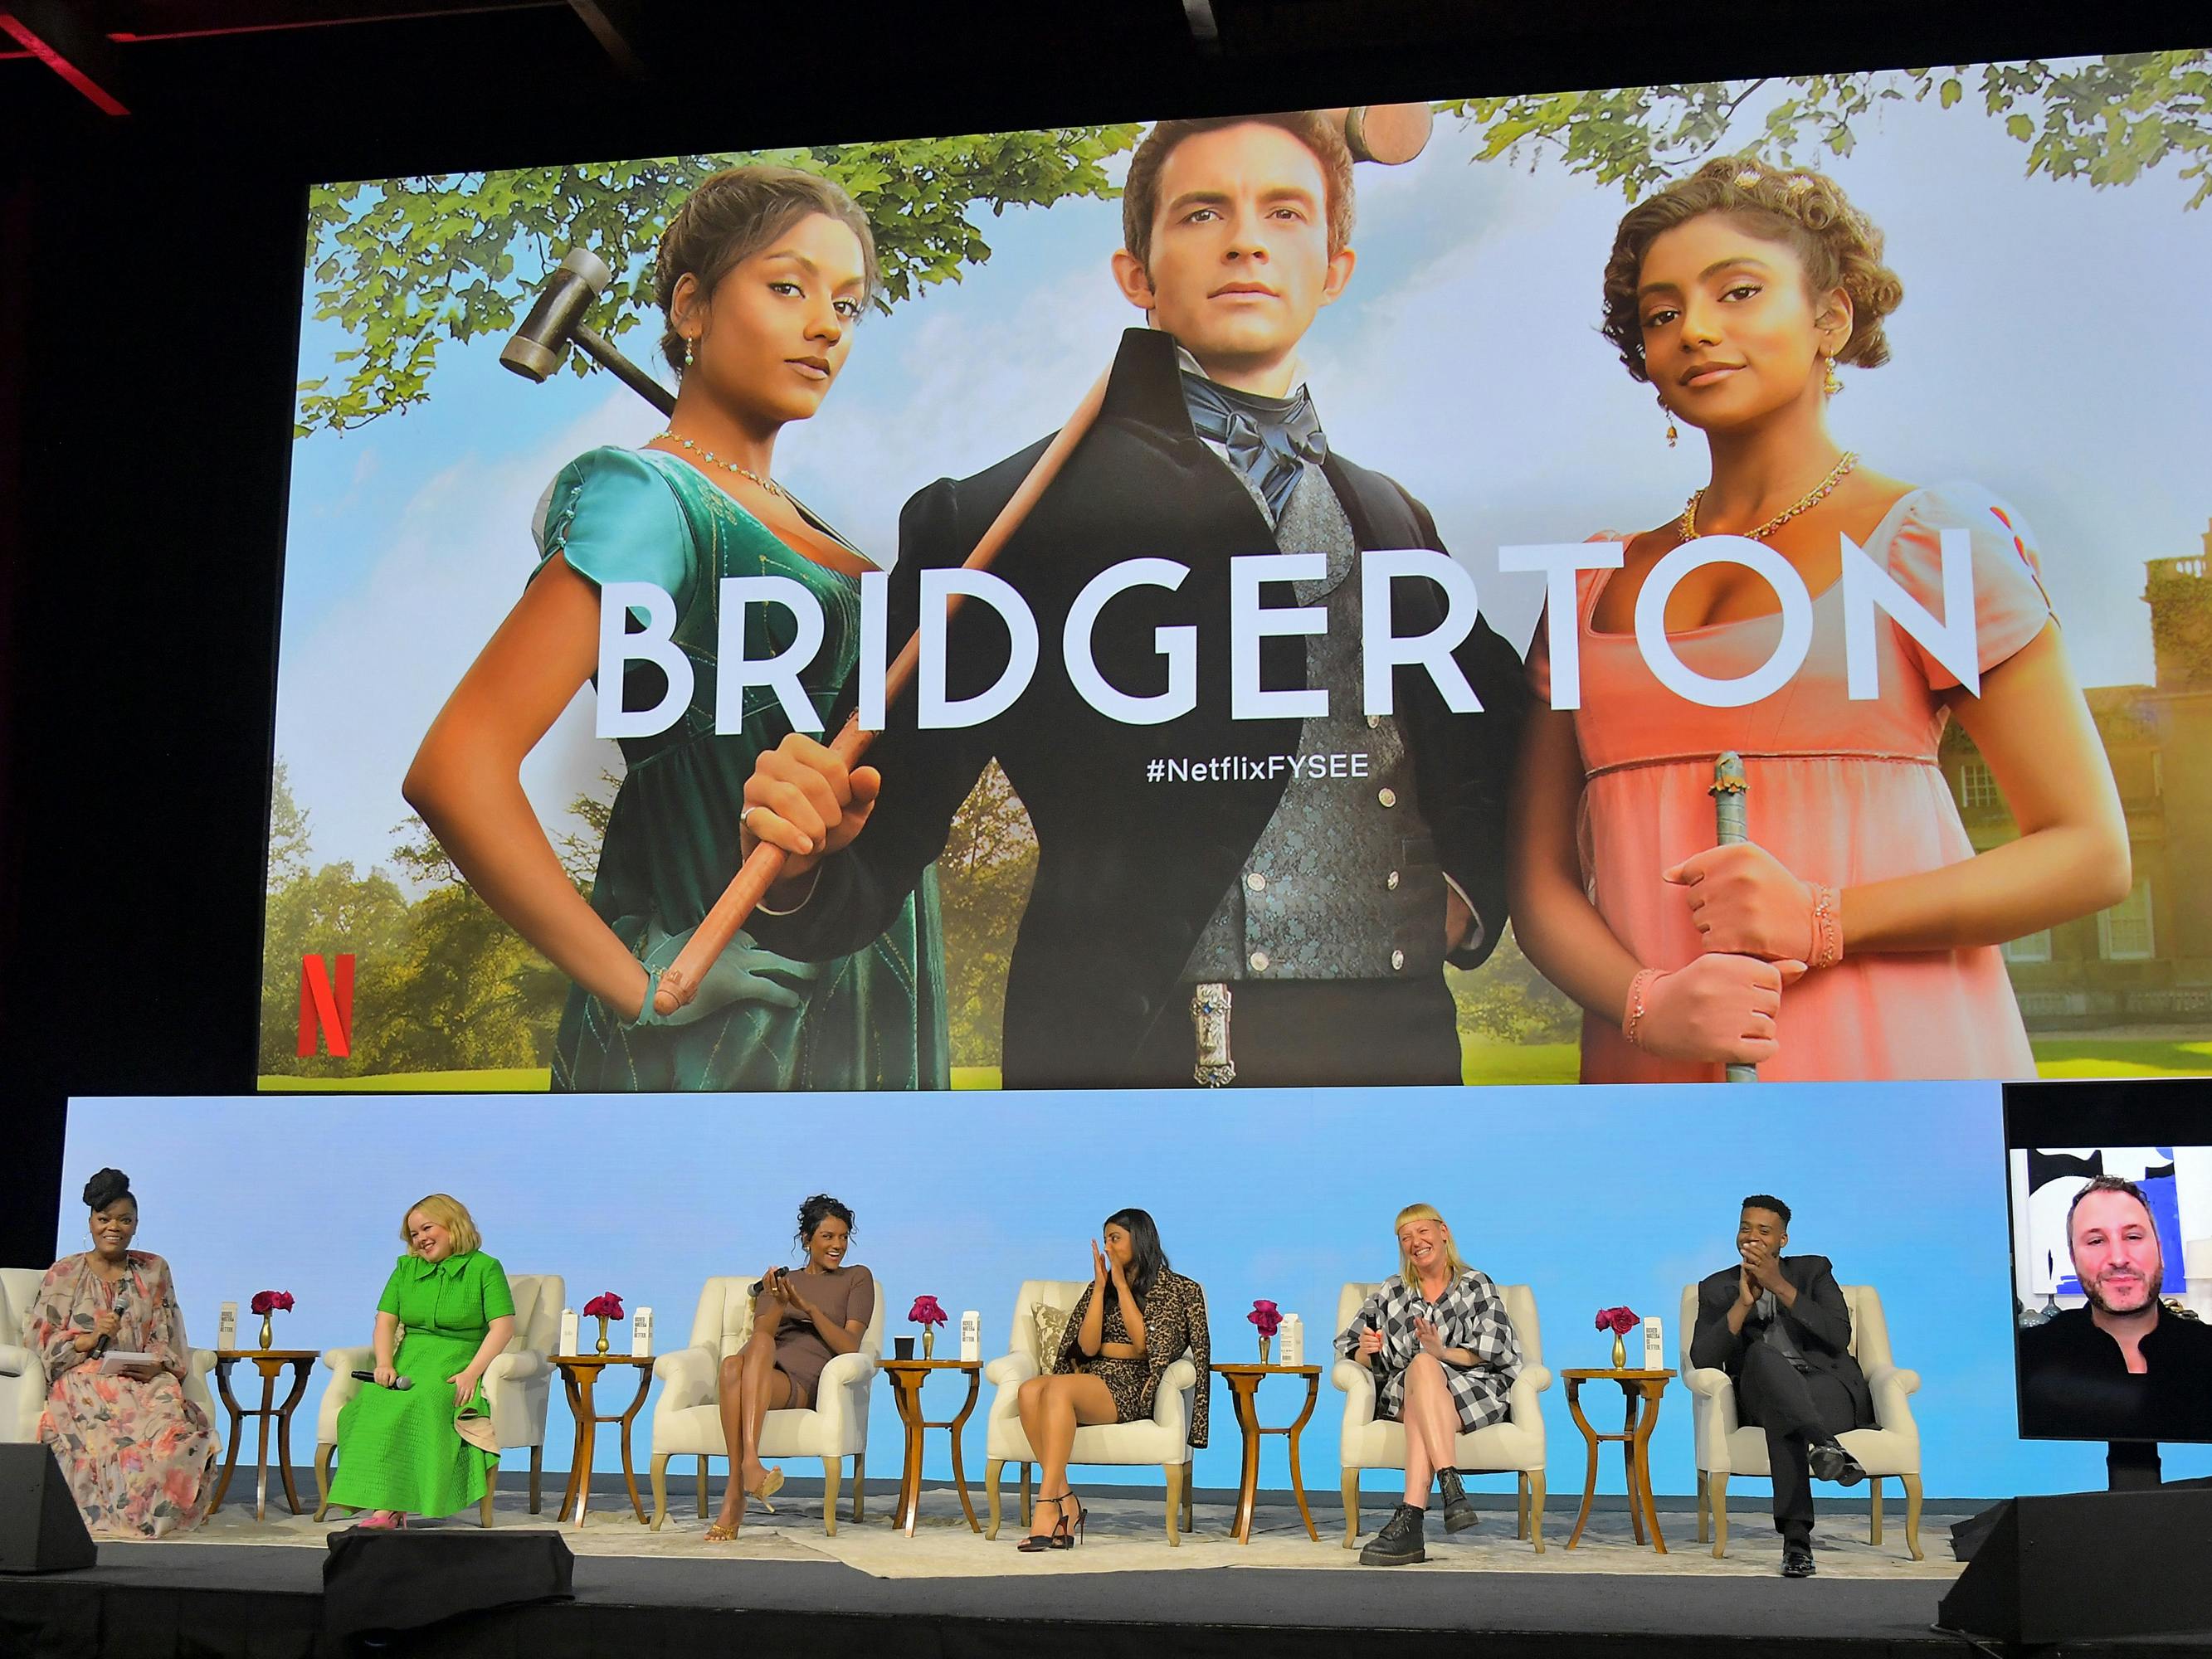 The Bridgerton title credit projected on the big screen over the panel's participants. From left to right: Yvette Nicole Brown, Nicola Coughlan, Simone Ashley, Charithra Chandran, Sophie Canale, Kris Bowers, and Chris Van Dusen (virtually).